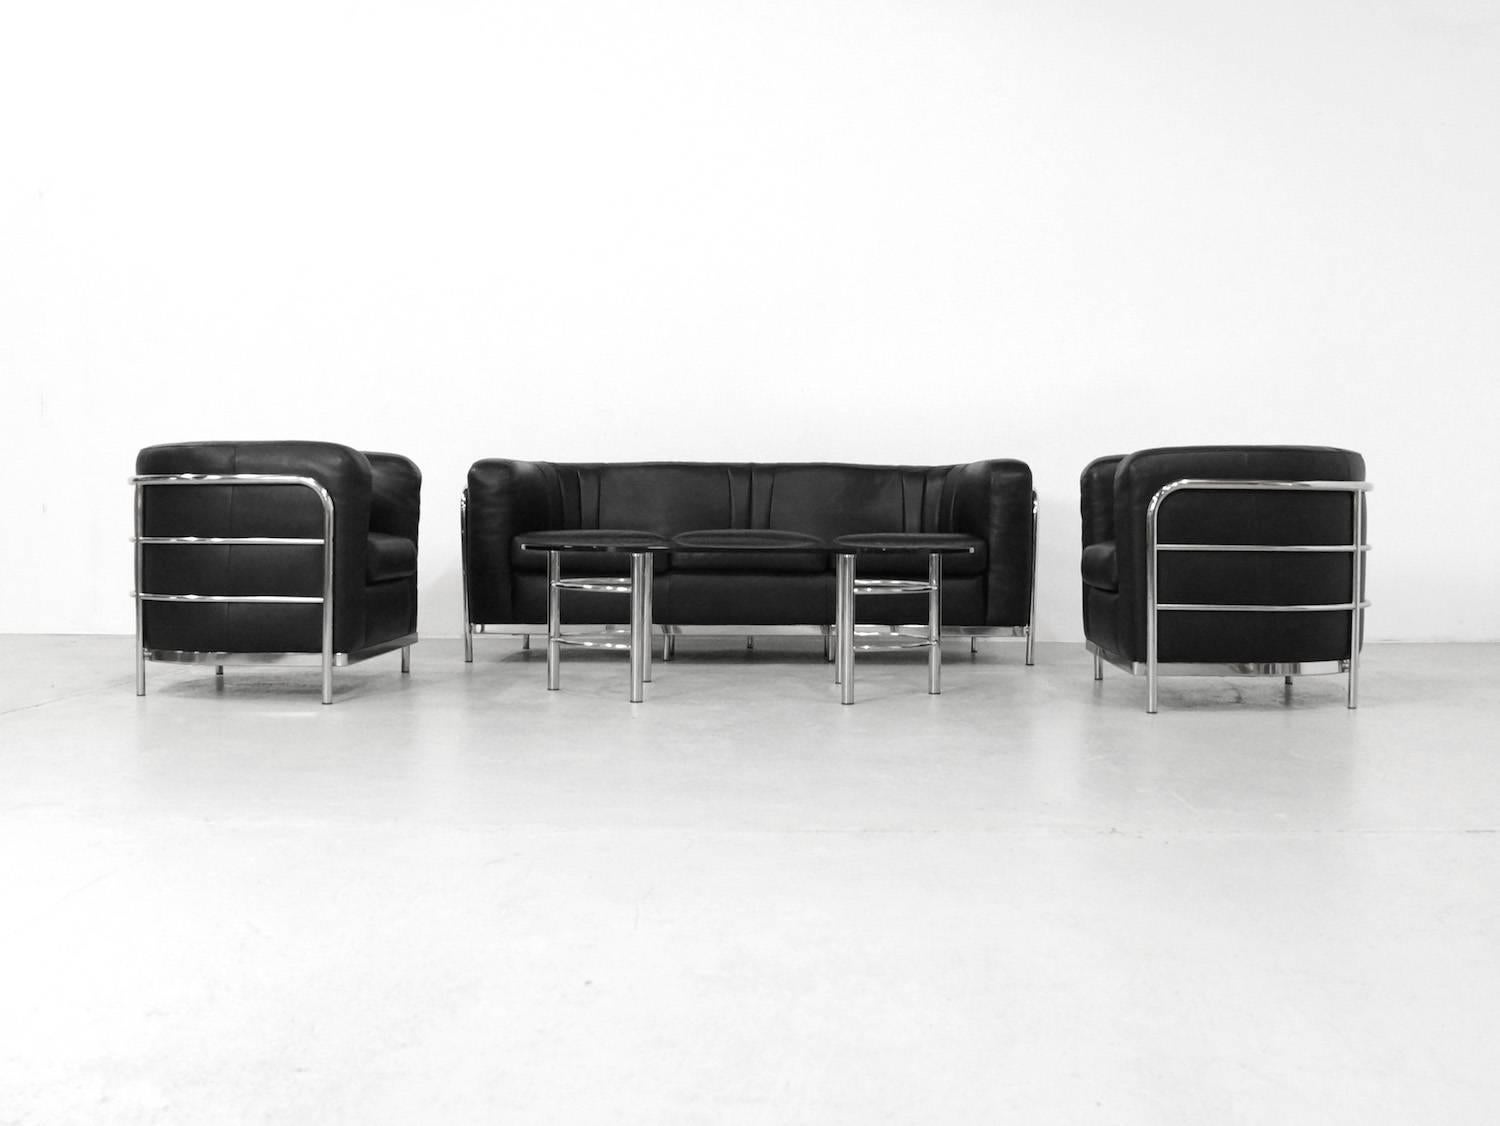 Beautiful Onda sofa set in black leather with the original special produced Onda coffee table.
This sofa set is designed Paolo Lomazzi in 1985 for Zanotta, The curved chrome back of the sofa looks very nice if you can place it freestanding.
The set